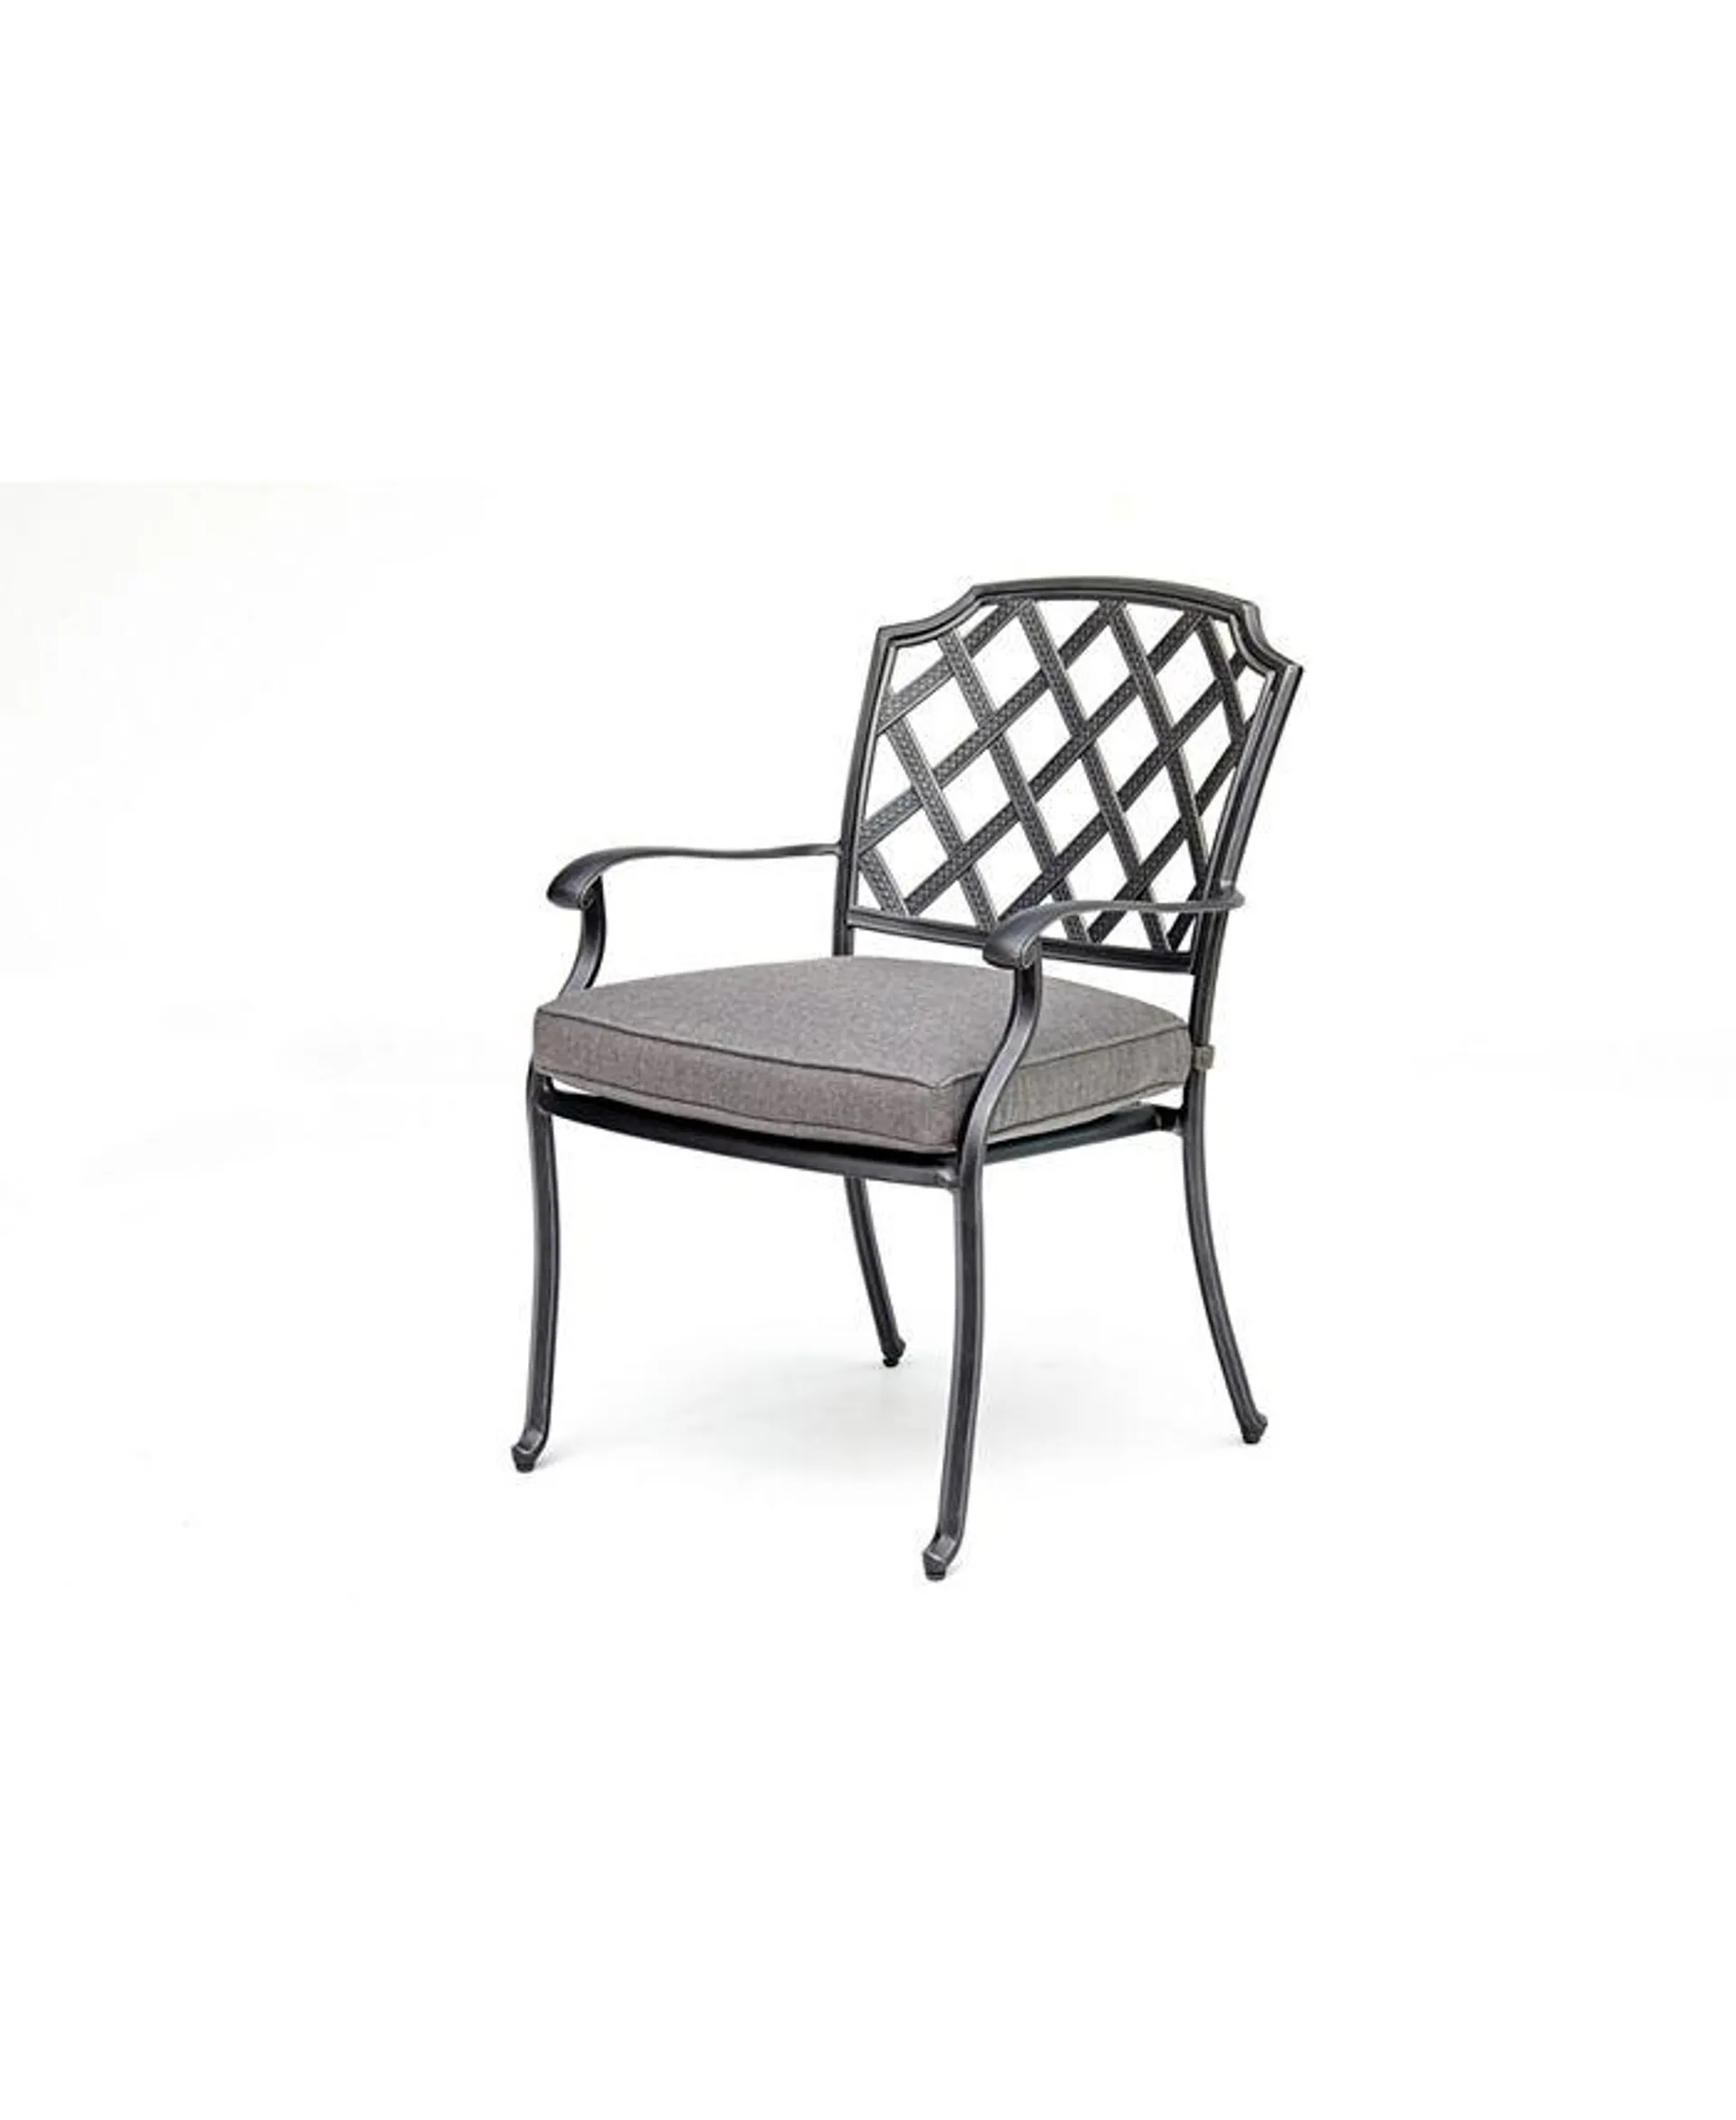 Vintage II Outdoor Dining Chair with Outdura® Cushions, Created for Macy's